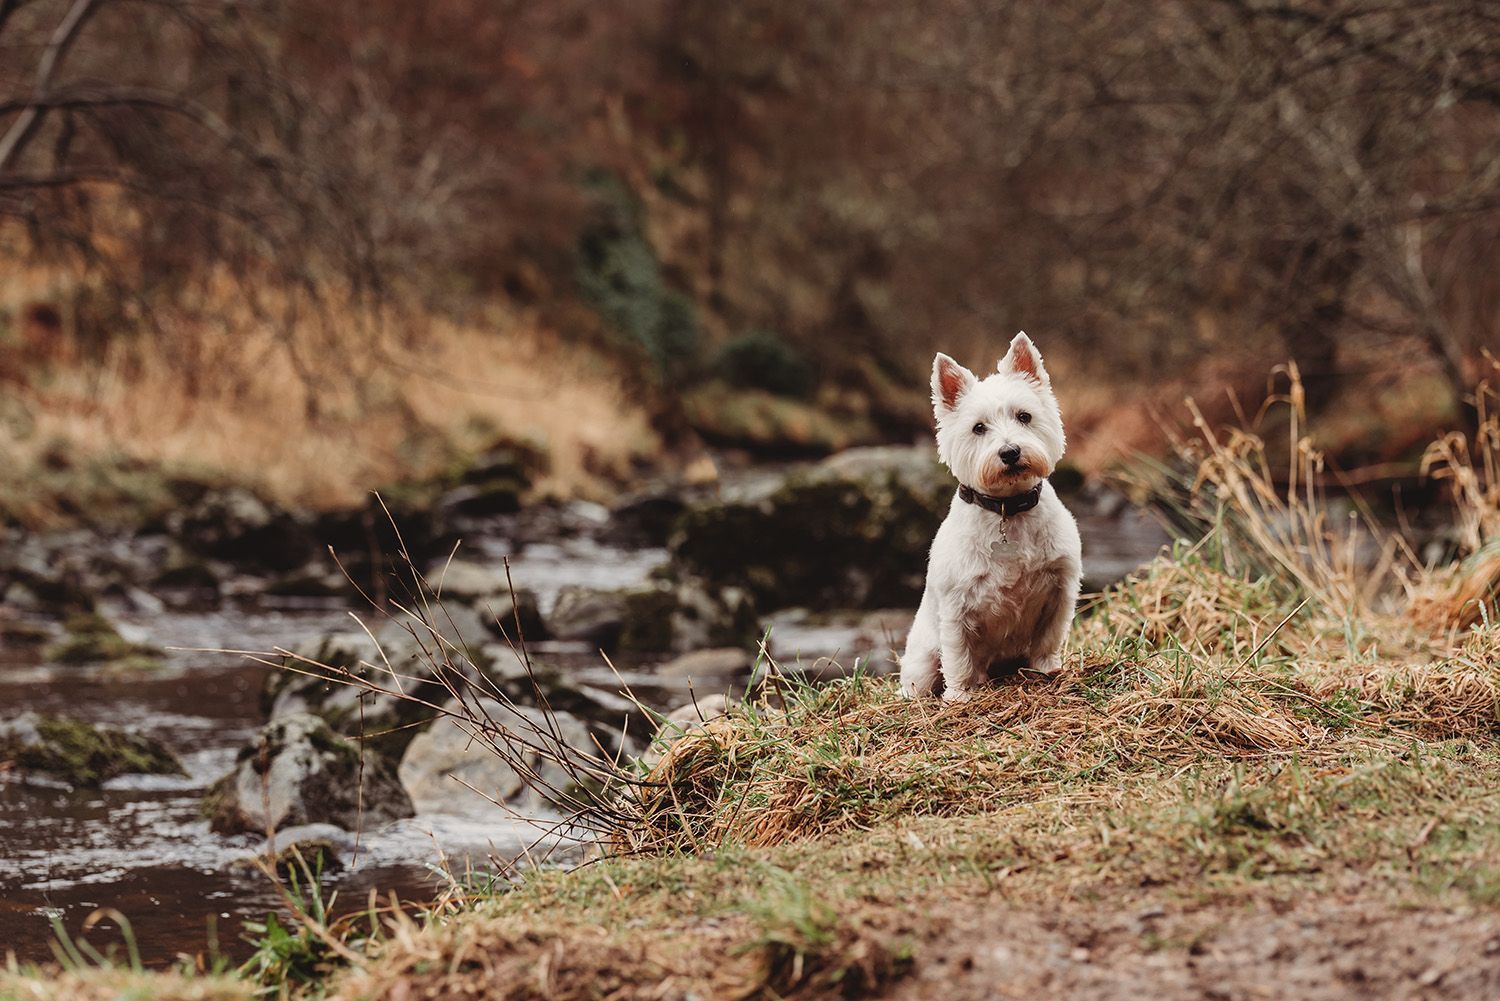 pet photography session - Angus the Westie